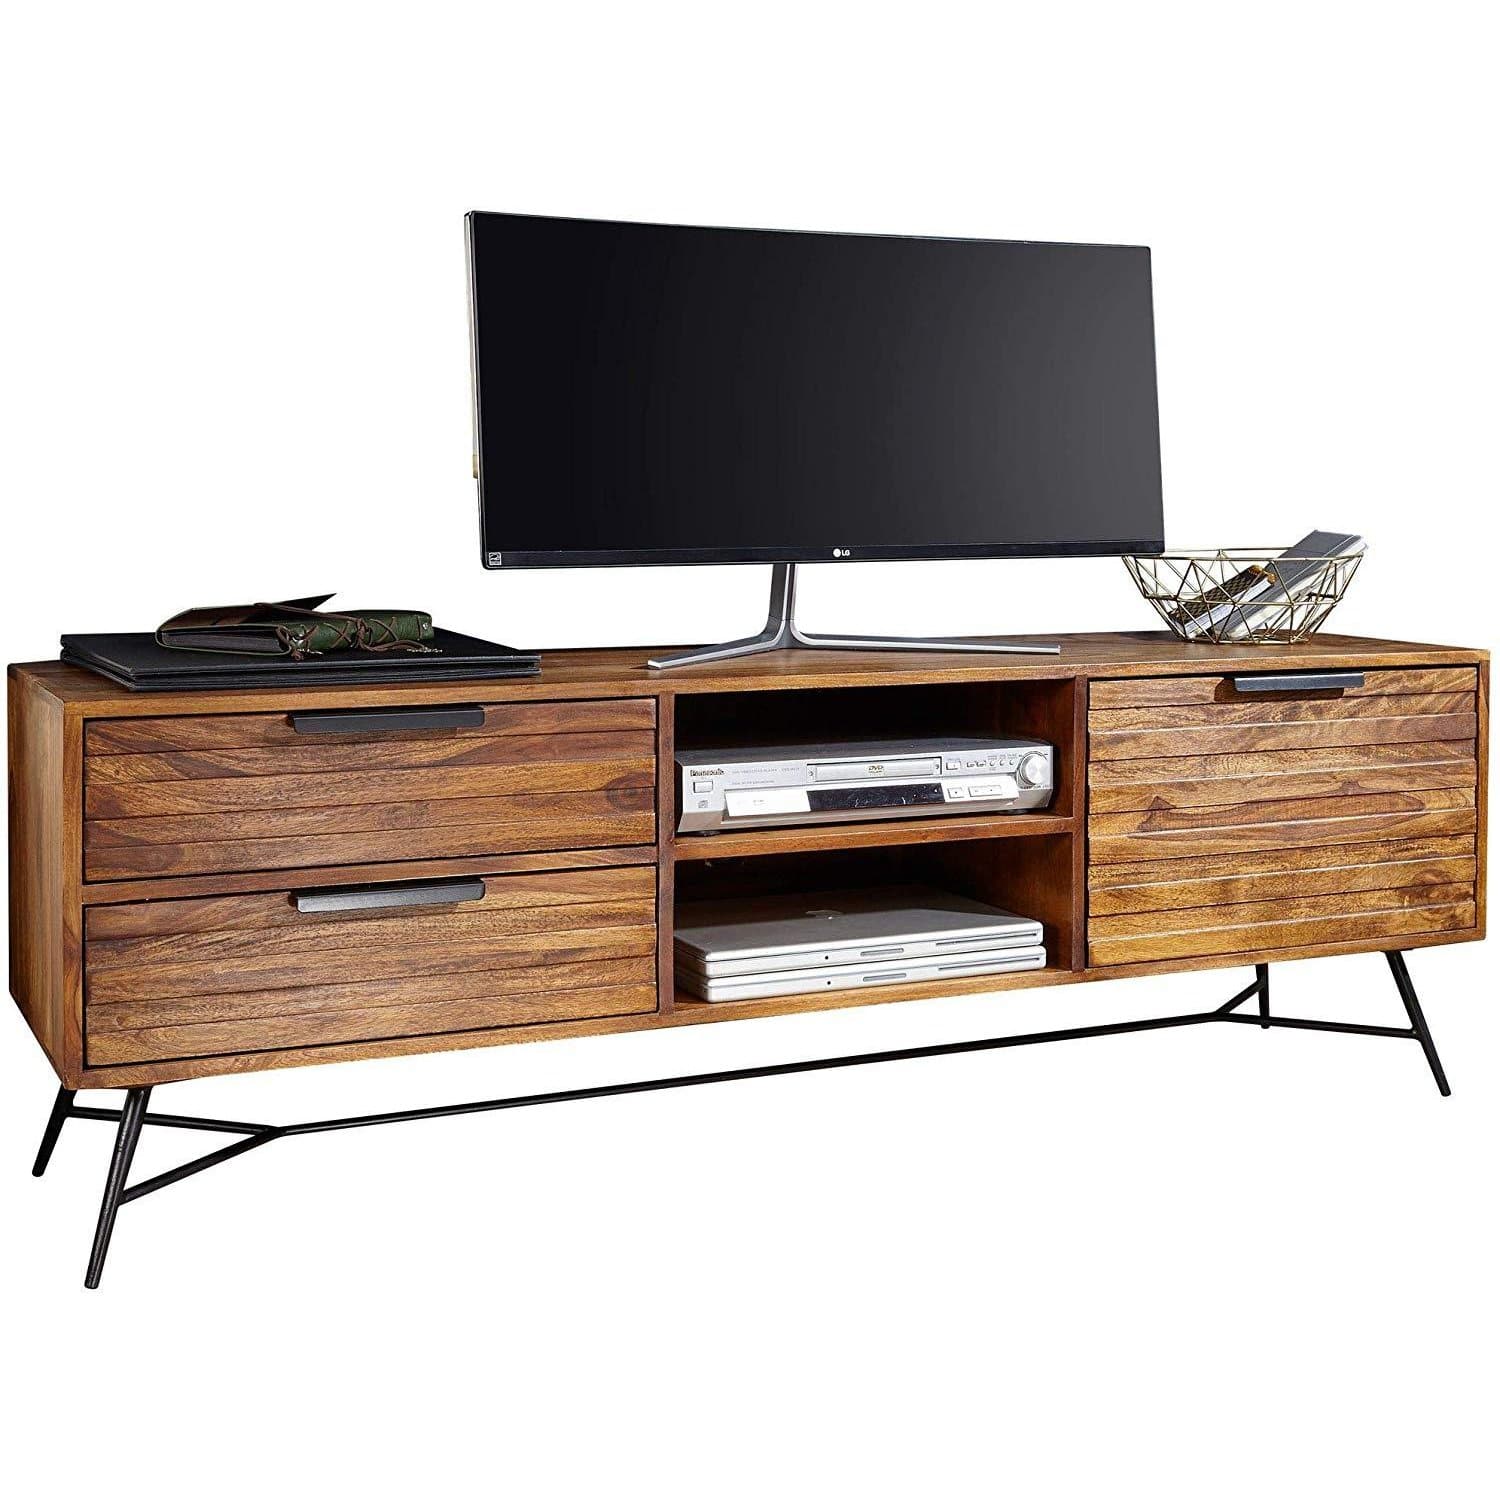 Nancy's TV Cabinet - Solid Wooden TV Cabinet - Lowbord Sheesham - Coffee Table - 160 x 54 x 40 cm